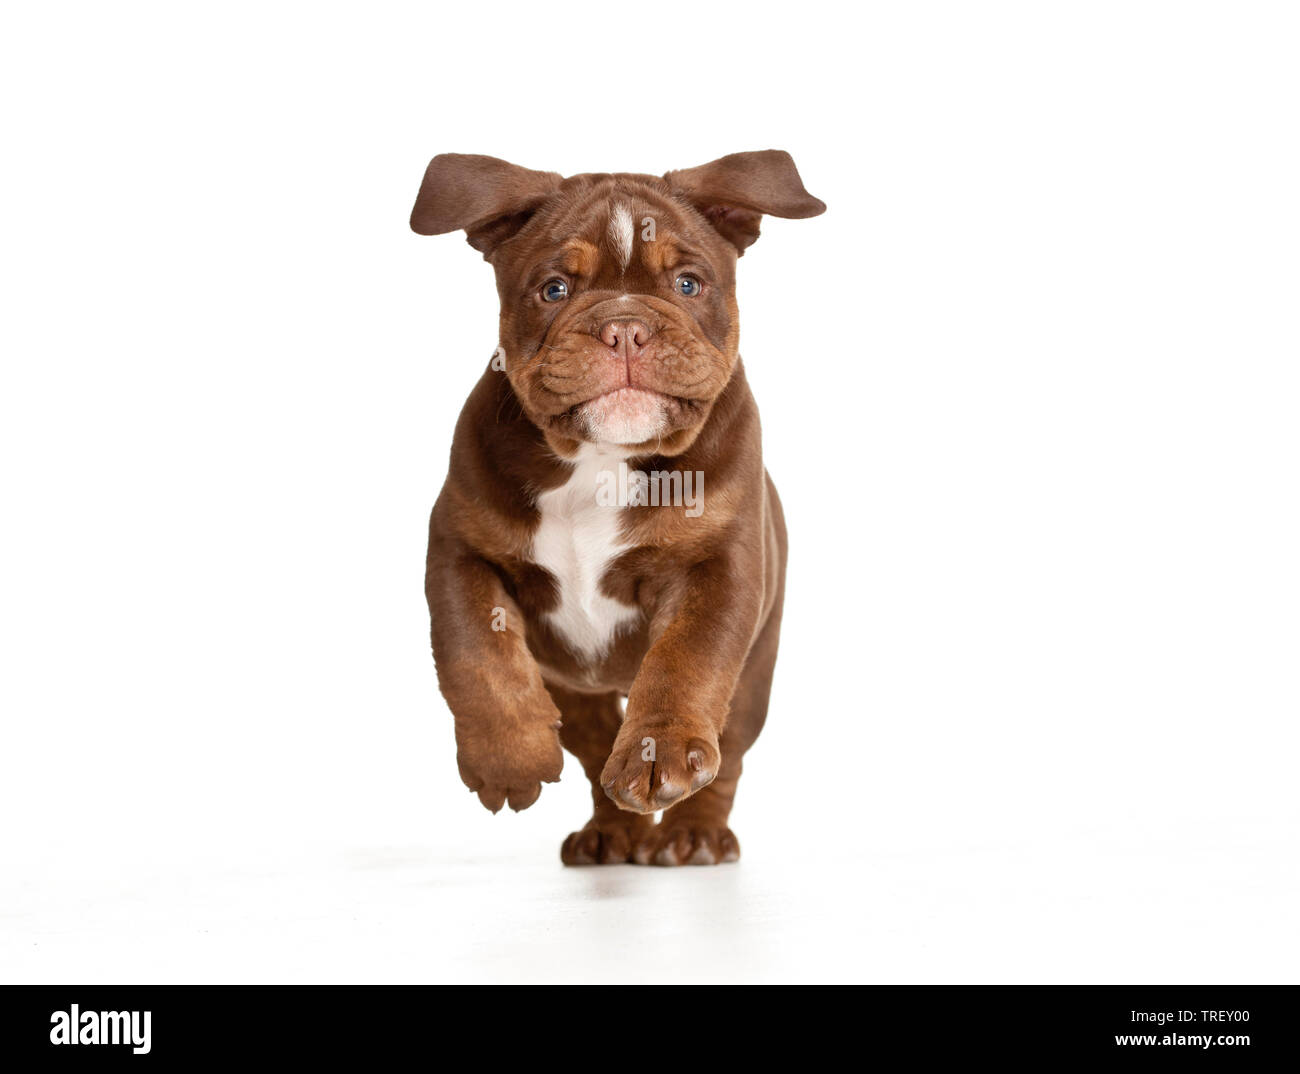 English Bulldog. Puppy running towards the camera. Studio picture against a white background. Germany Stock Photo